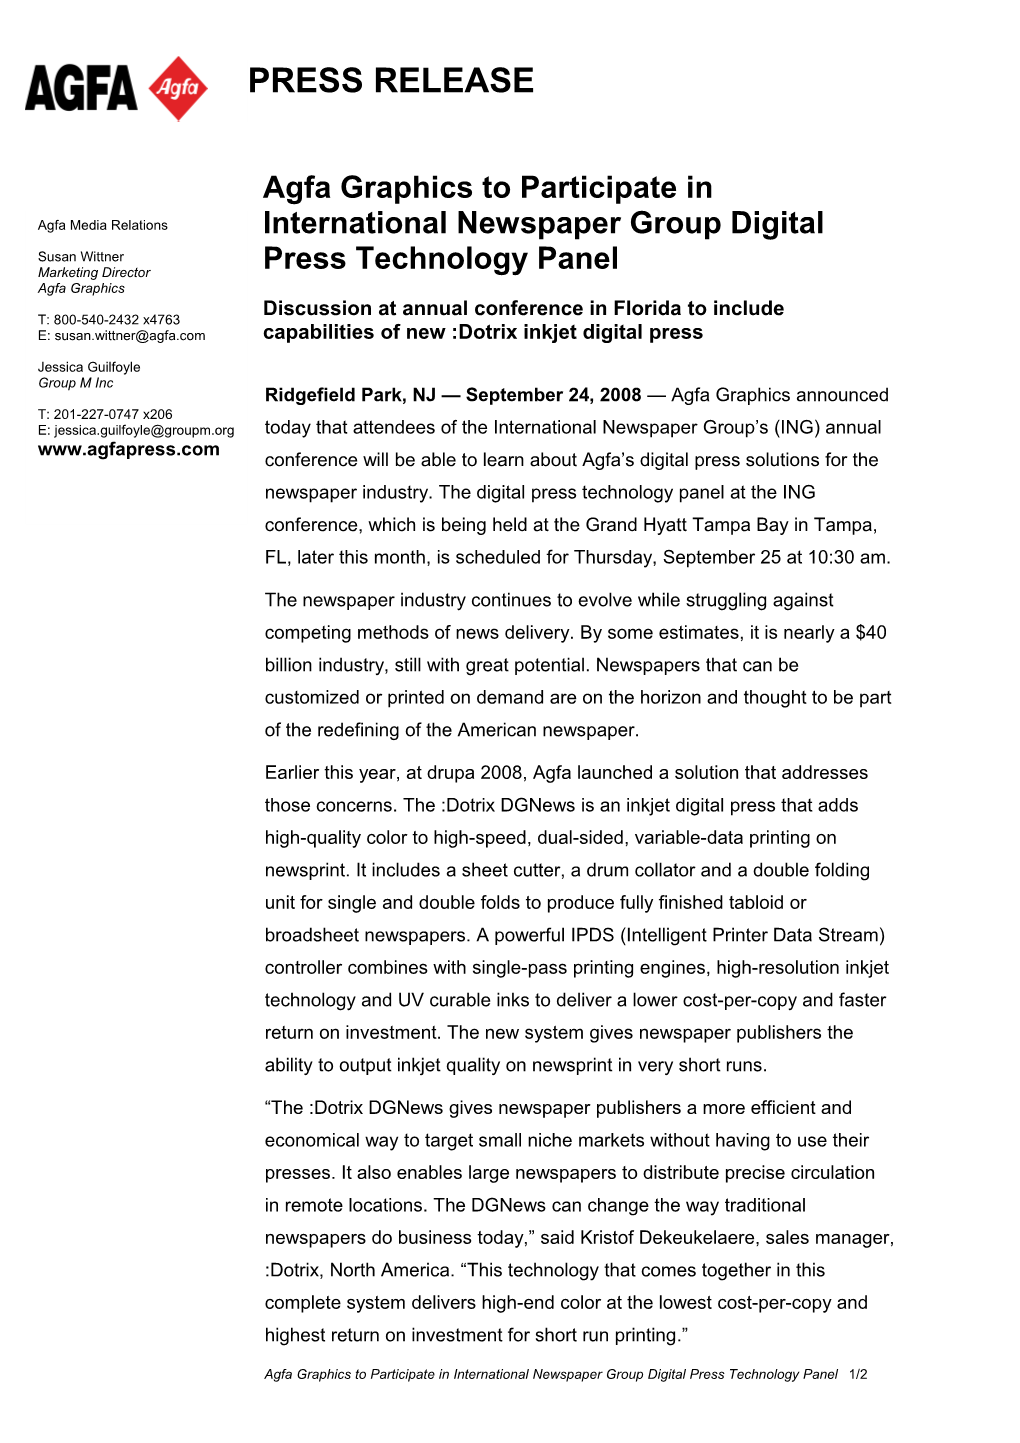 Agfa Graphics to Participate in International Newspaper Group Digital Press Technology Panel